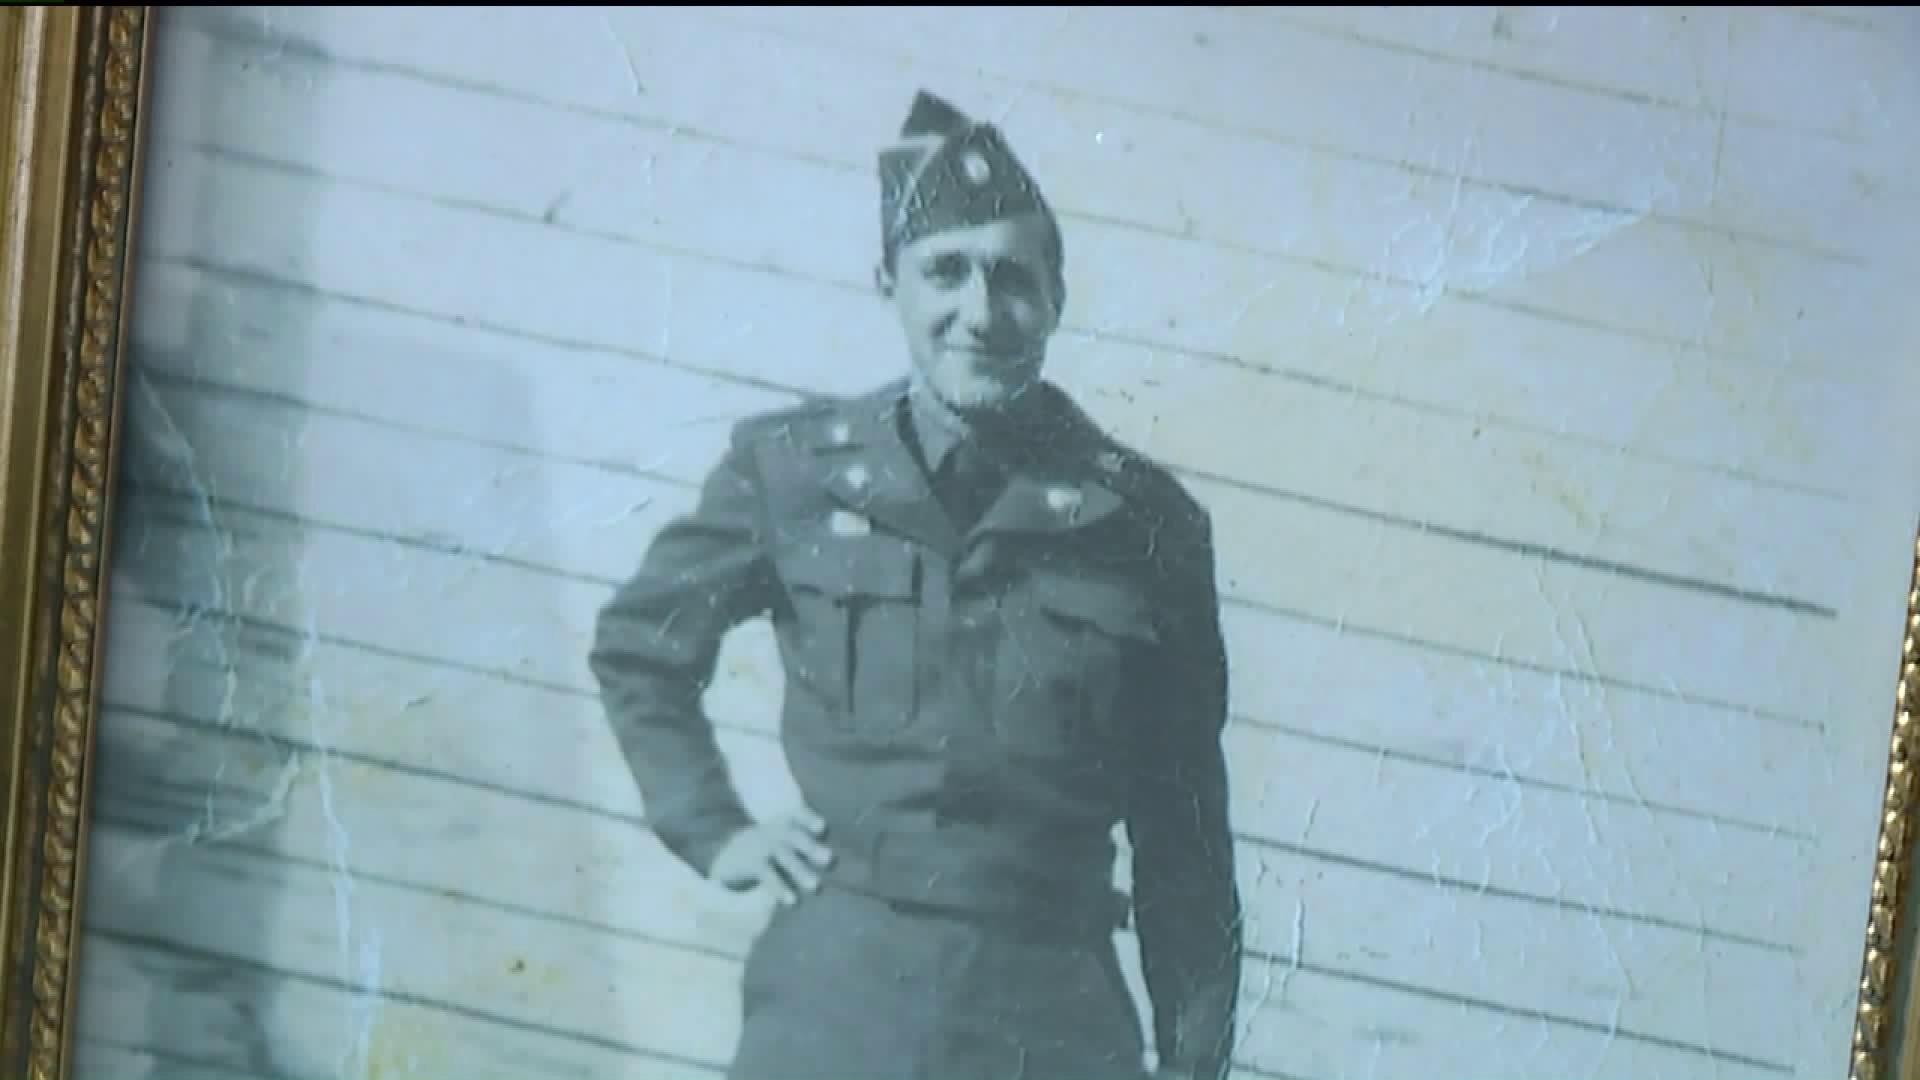 Korean War Soldier's Remains Come Home After 66 Years